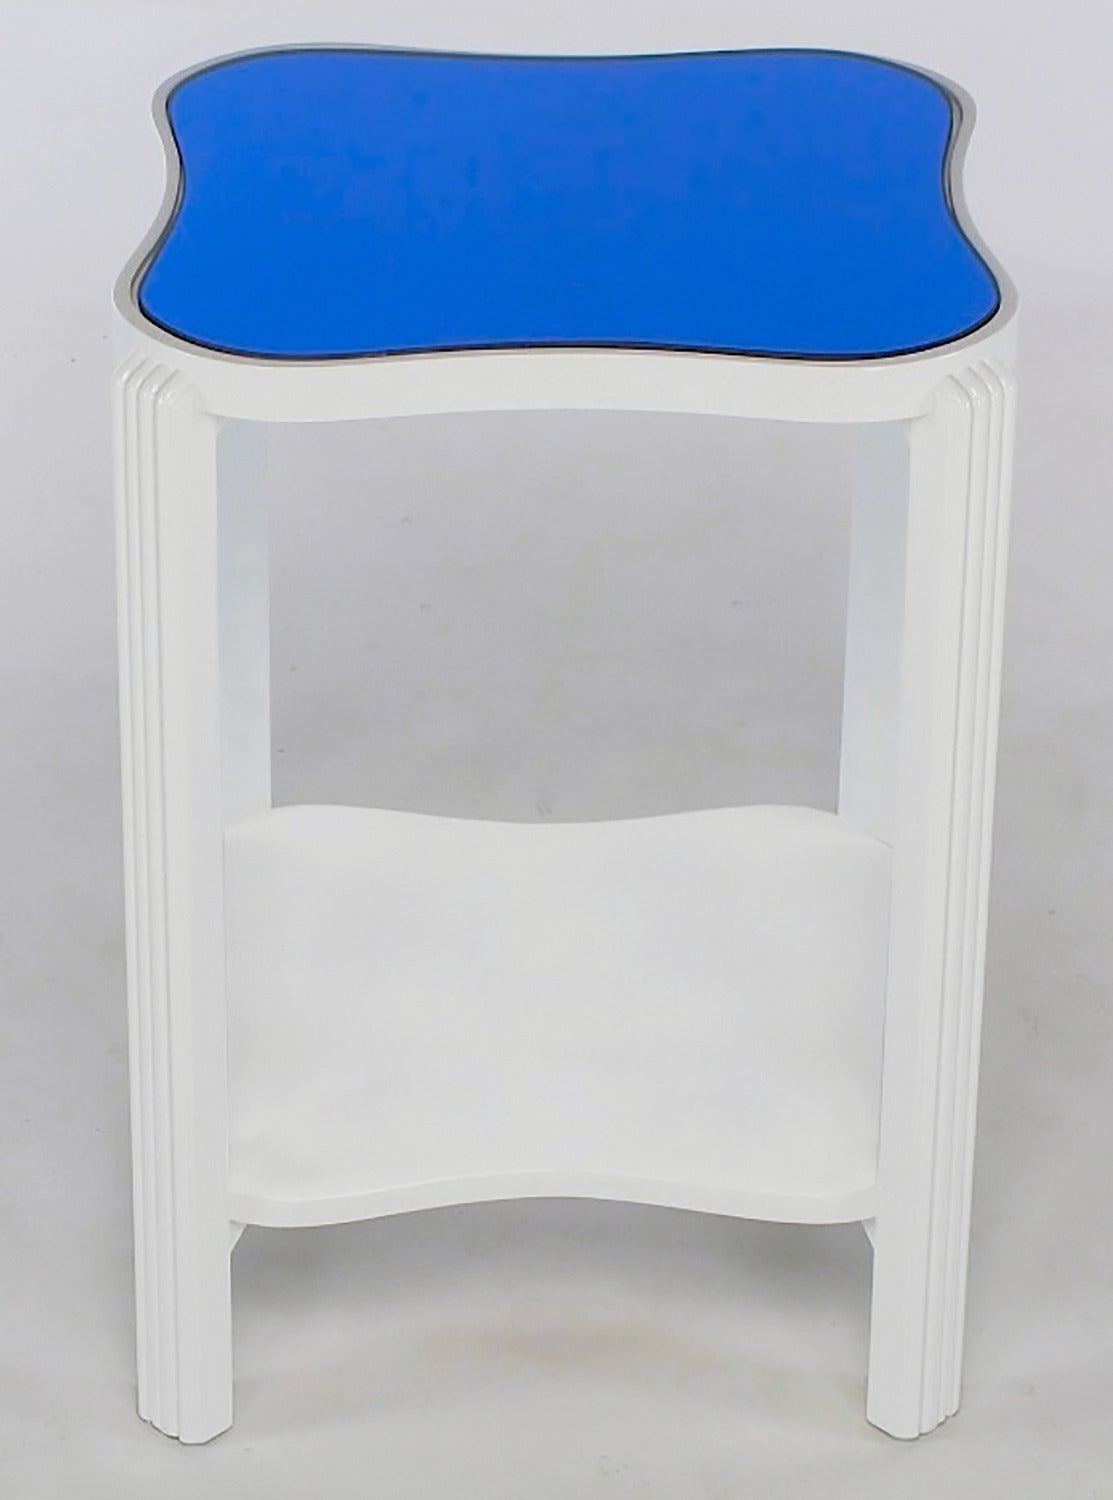 Restored gloss white lacquer over maple Art Deco end table with original blue mirrored top. Squared bow tie shaped two tiered surface; top tier with inset blue mirror and second tier with optional blue mirror or gloss white lacquer. Fluted front